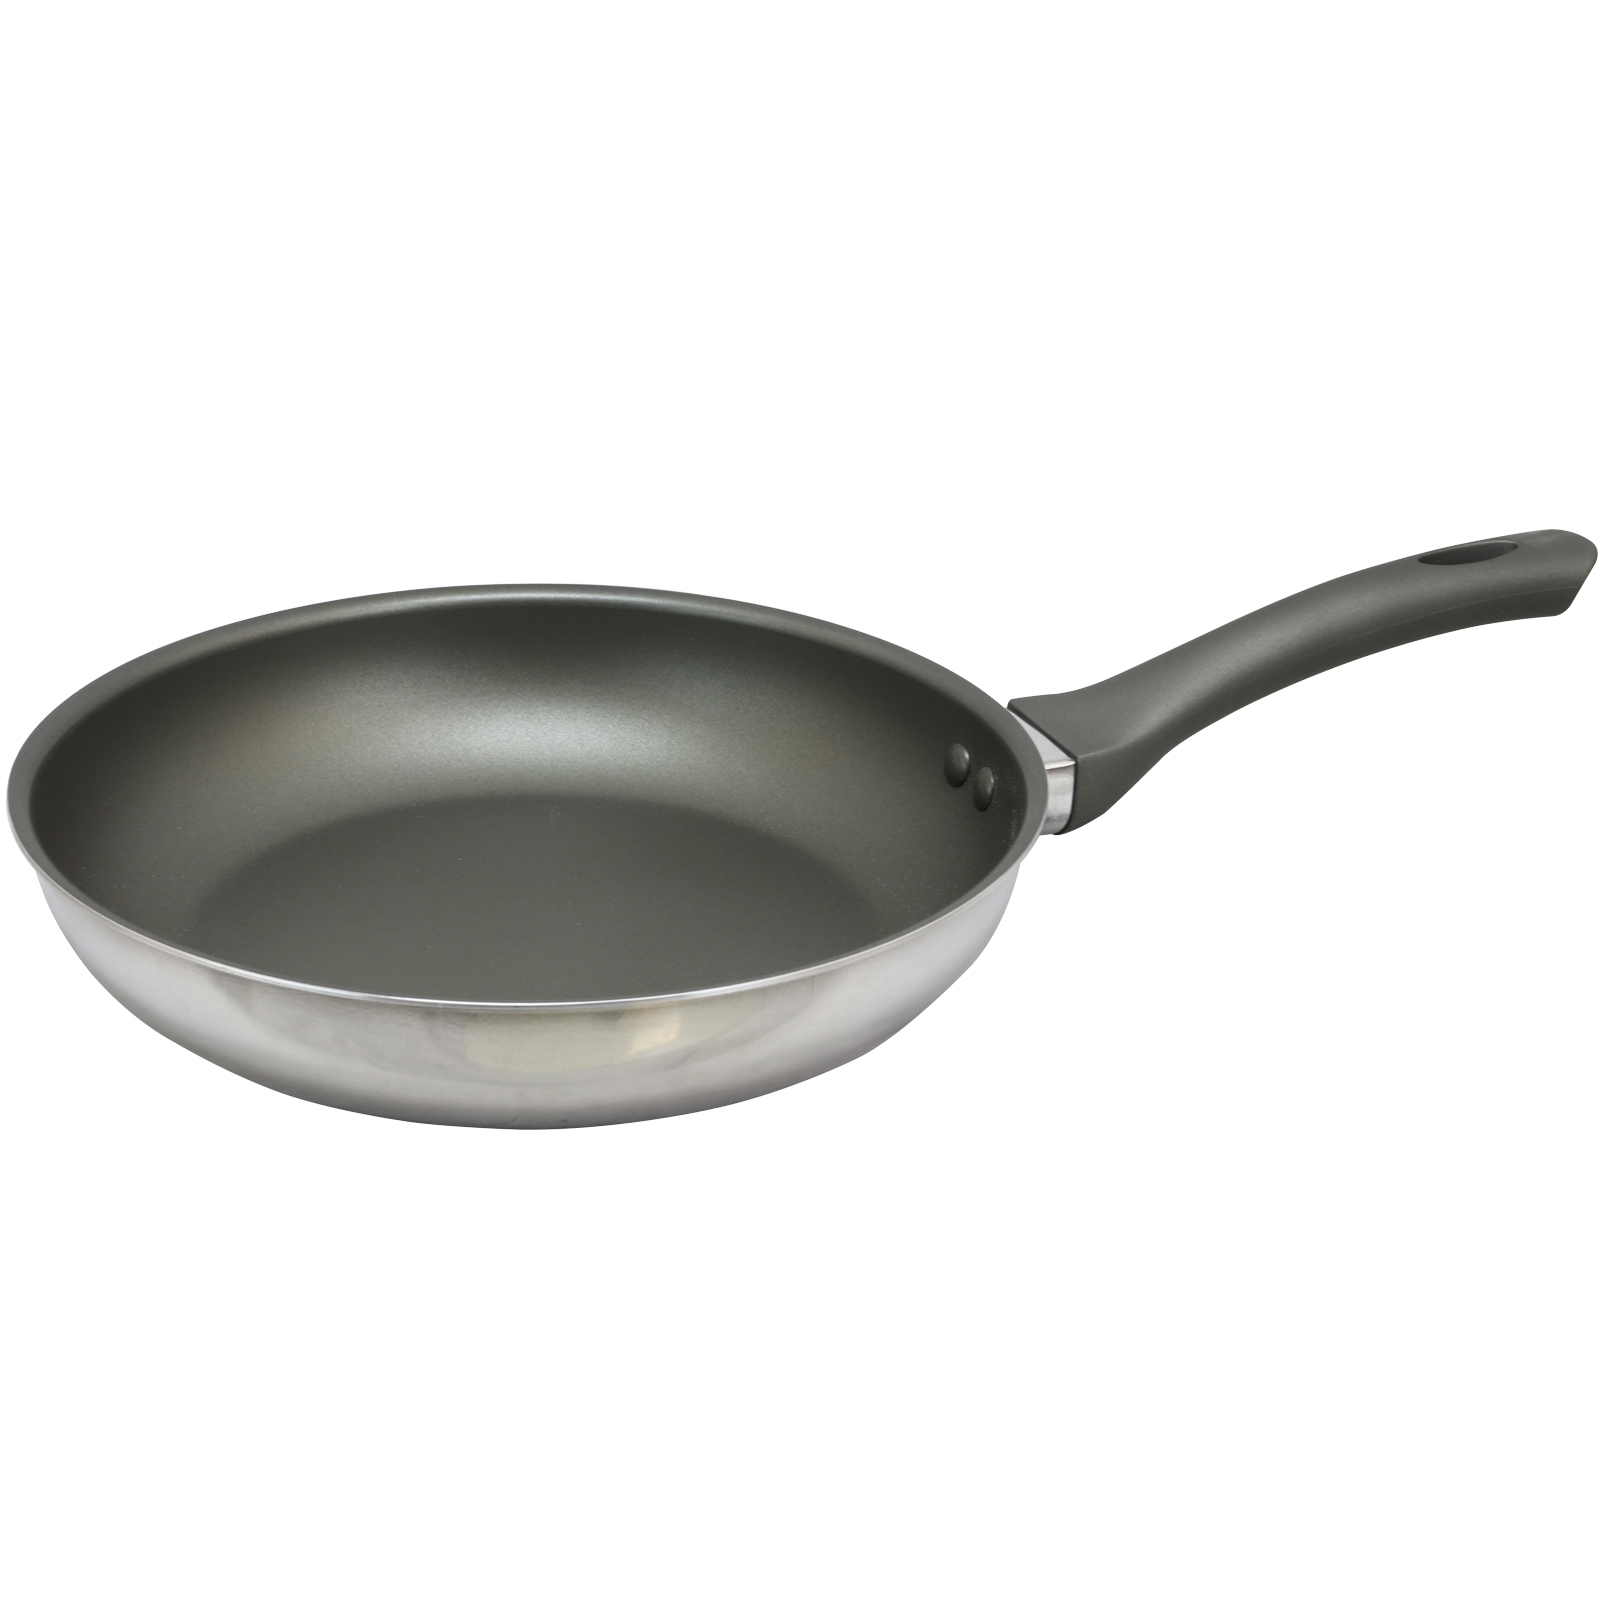 Oster Rivendell 10 inch Aluminum Frying Pan in Mirror Polish